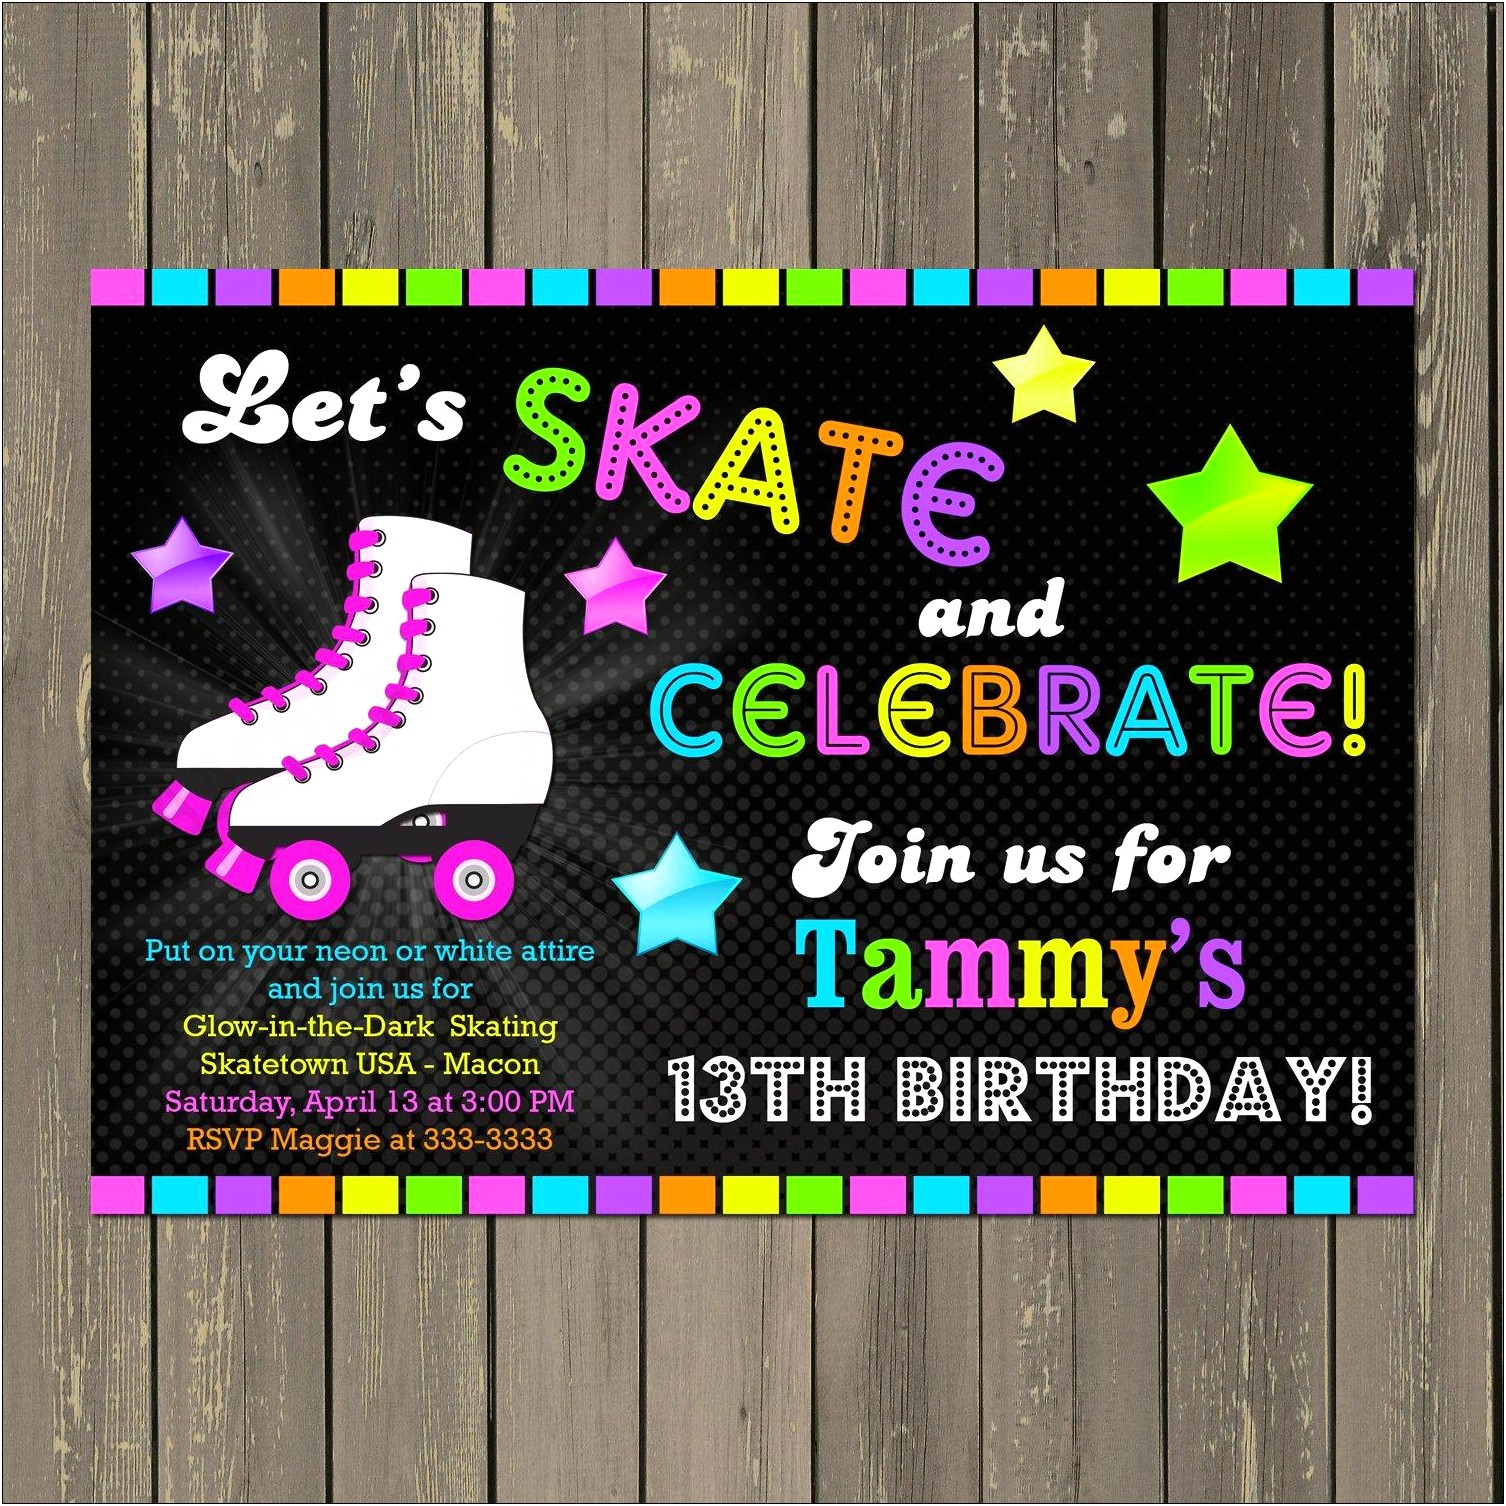 Roller Skating Party Invitation Template Free